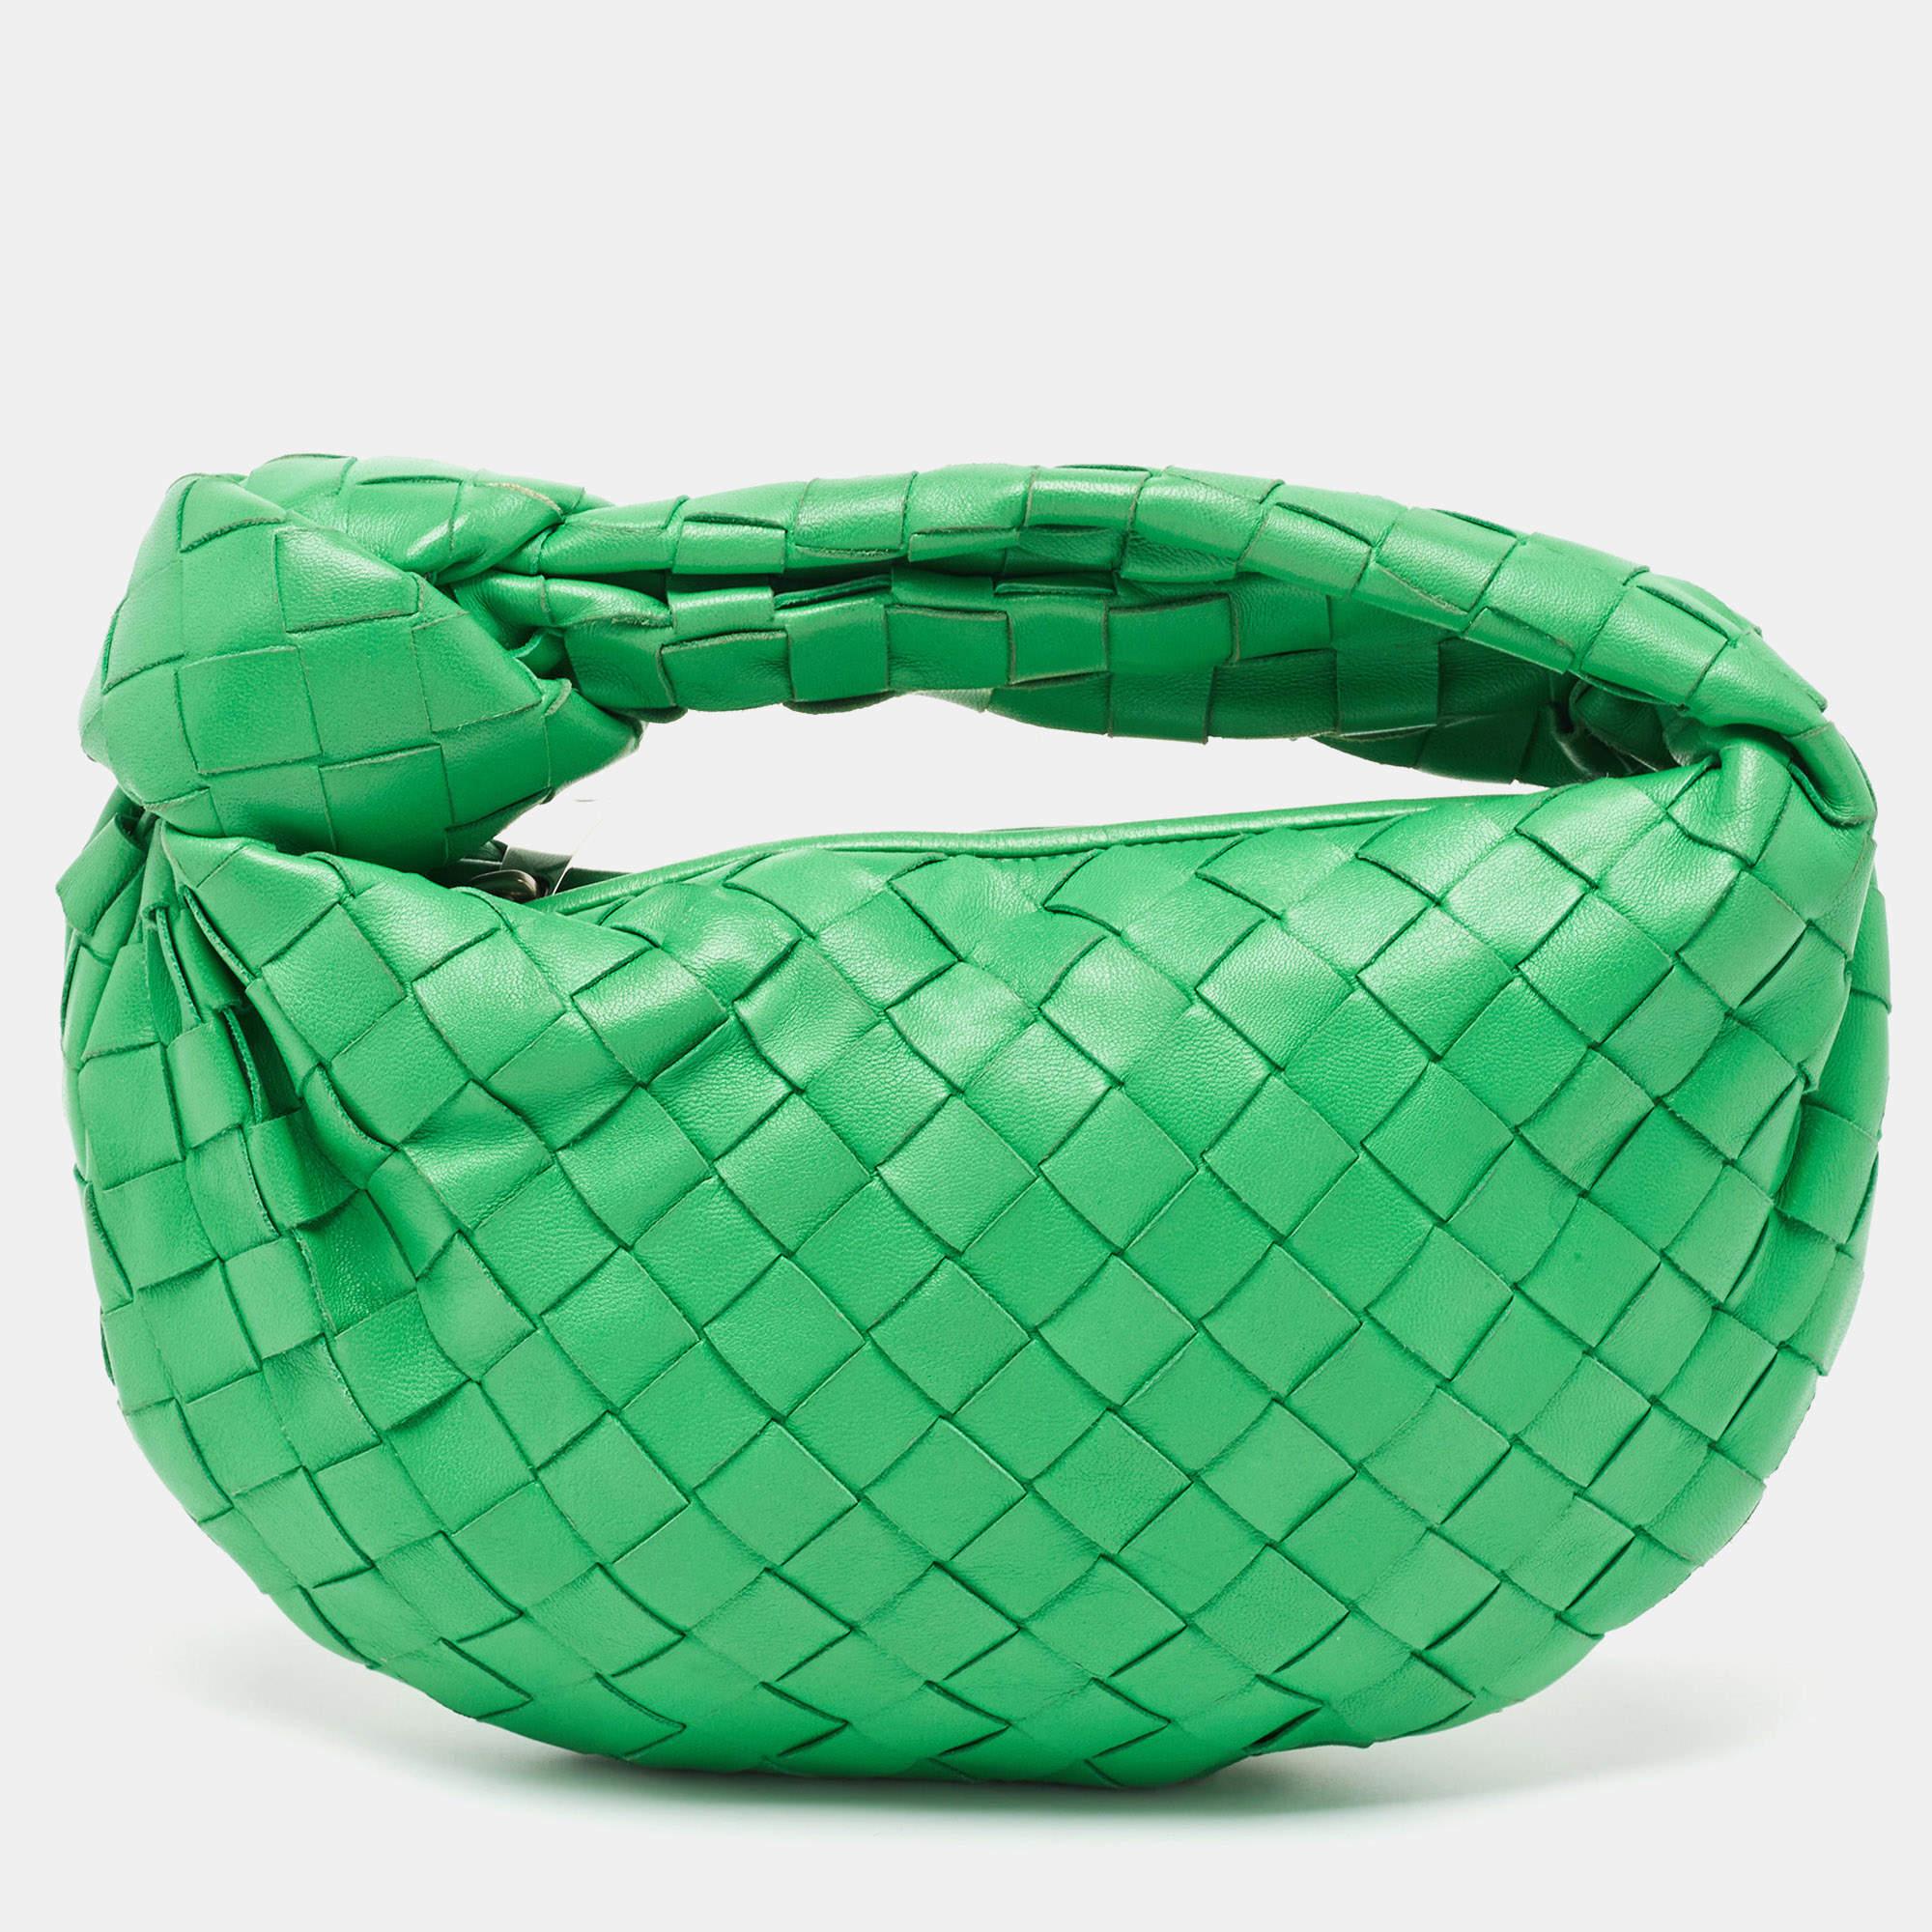 The Bottega Veneta Jodie hobo is a luxurious and compact handbag crafted from exquisite green leather woven in the brand's signature Intrecciato pattern. It features a relaxed hobo silhouette, a single top handle, and a zip closure, making it both